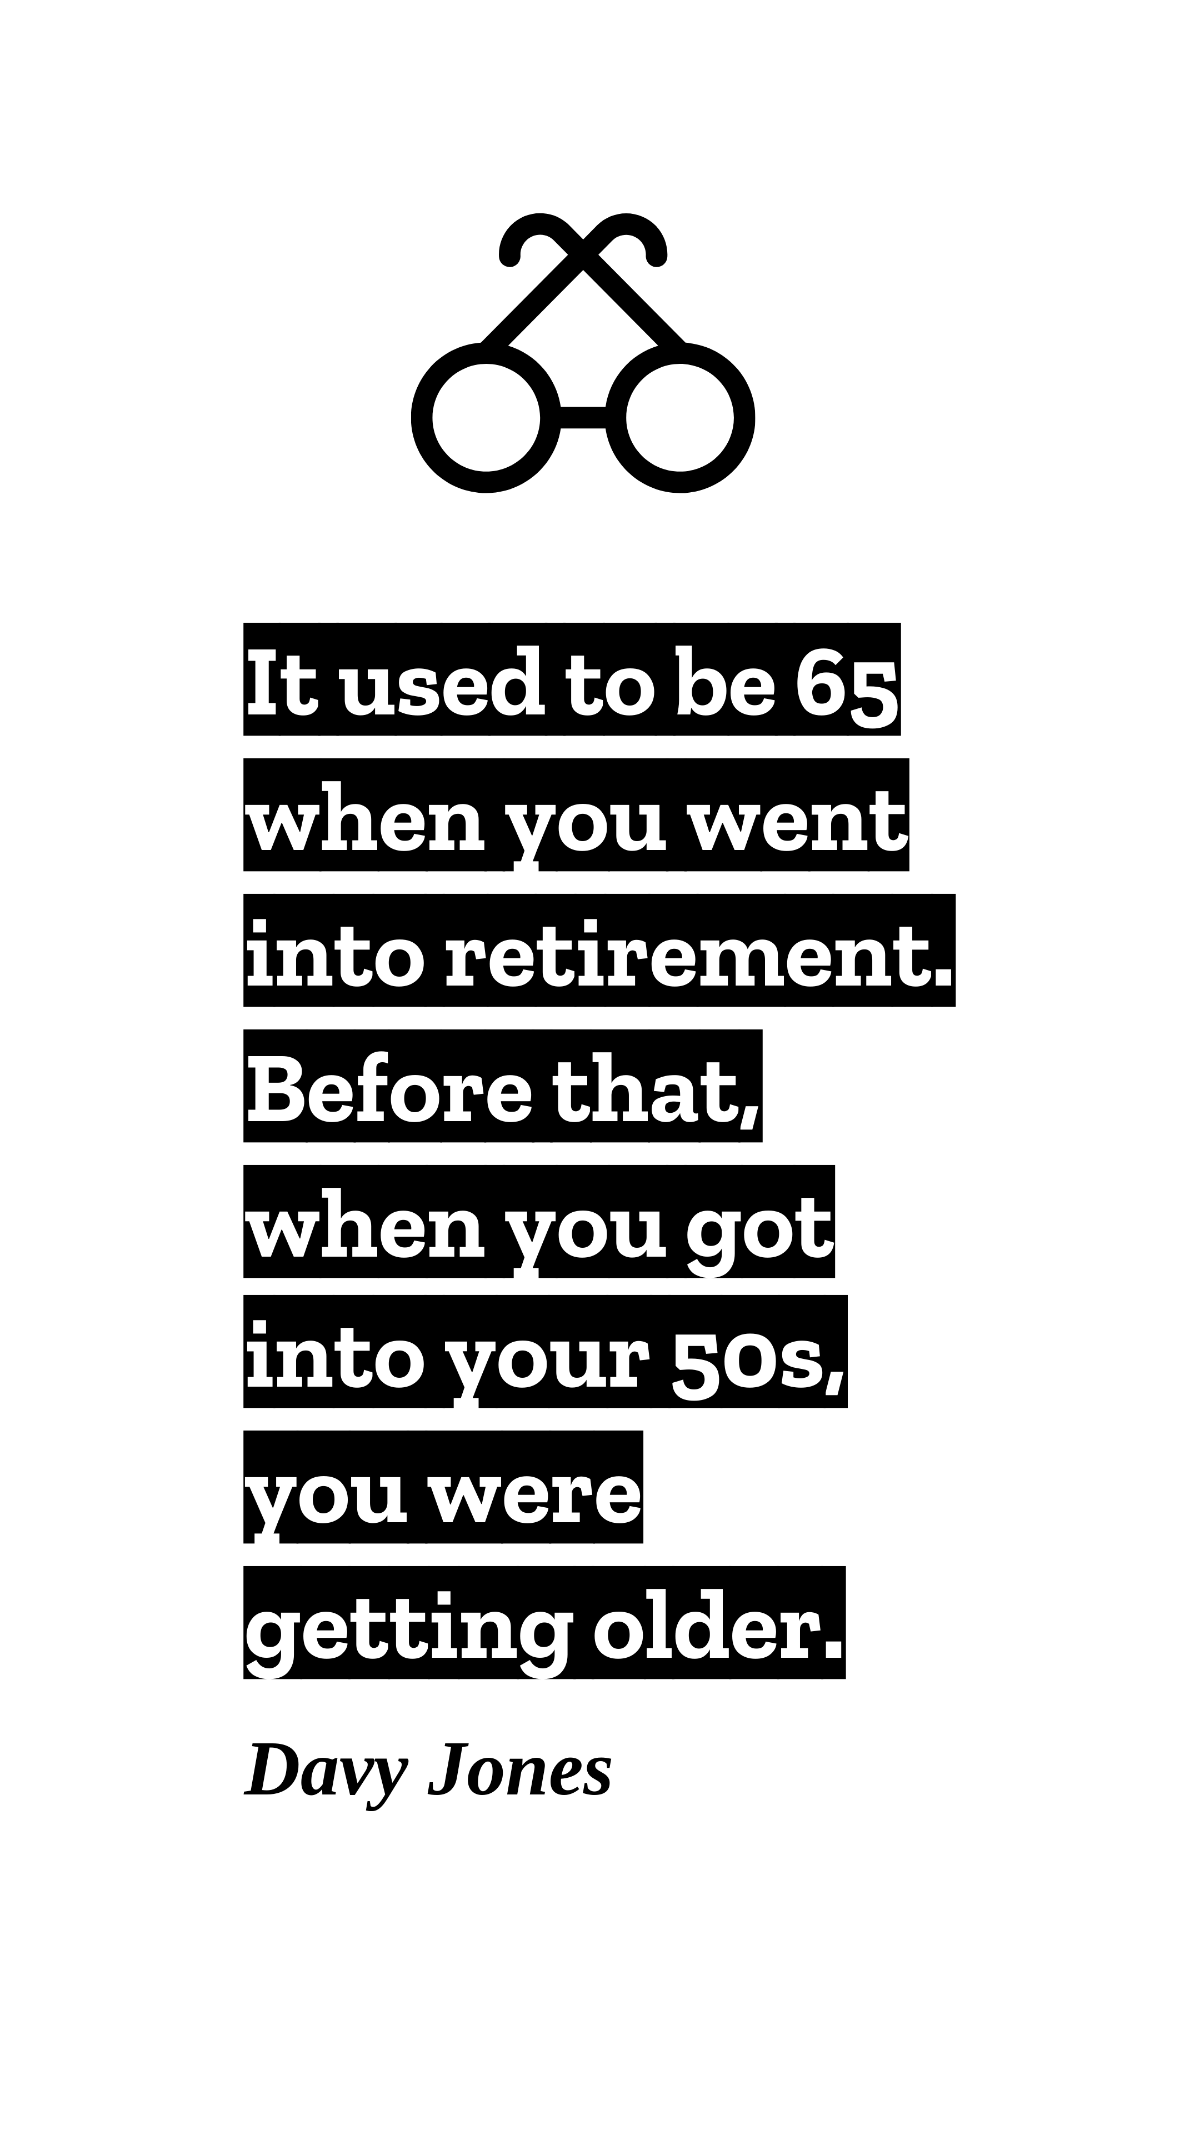 Davy Jones - It used to be 65 when you went into retirement. Before that, when you got into your 50s, you were getting older. Template